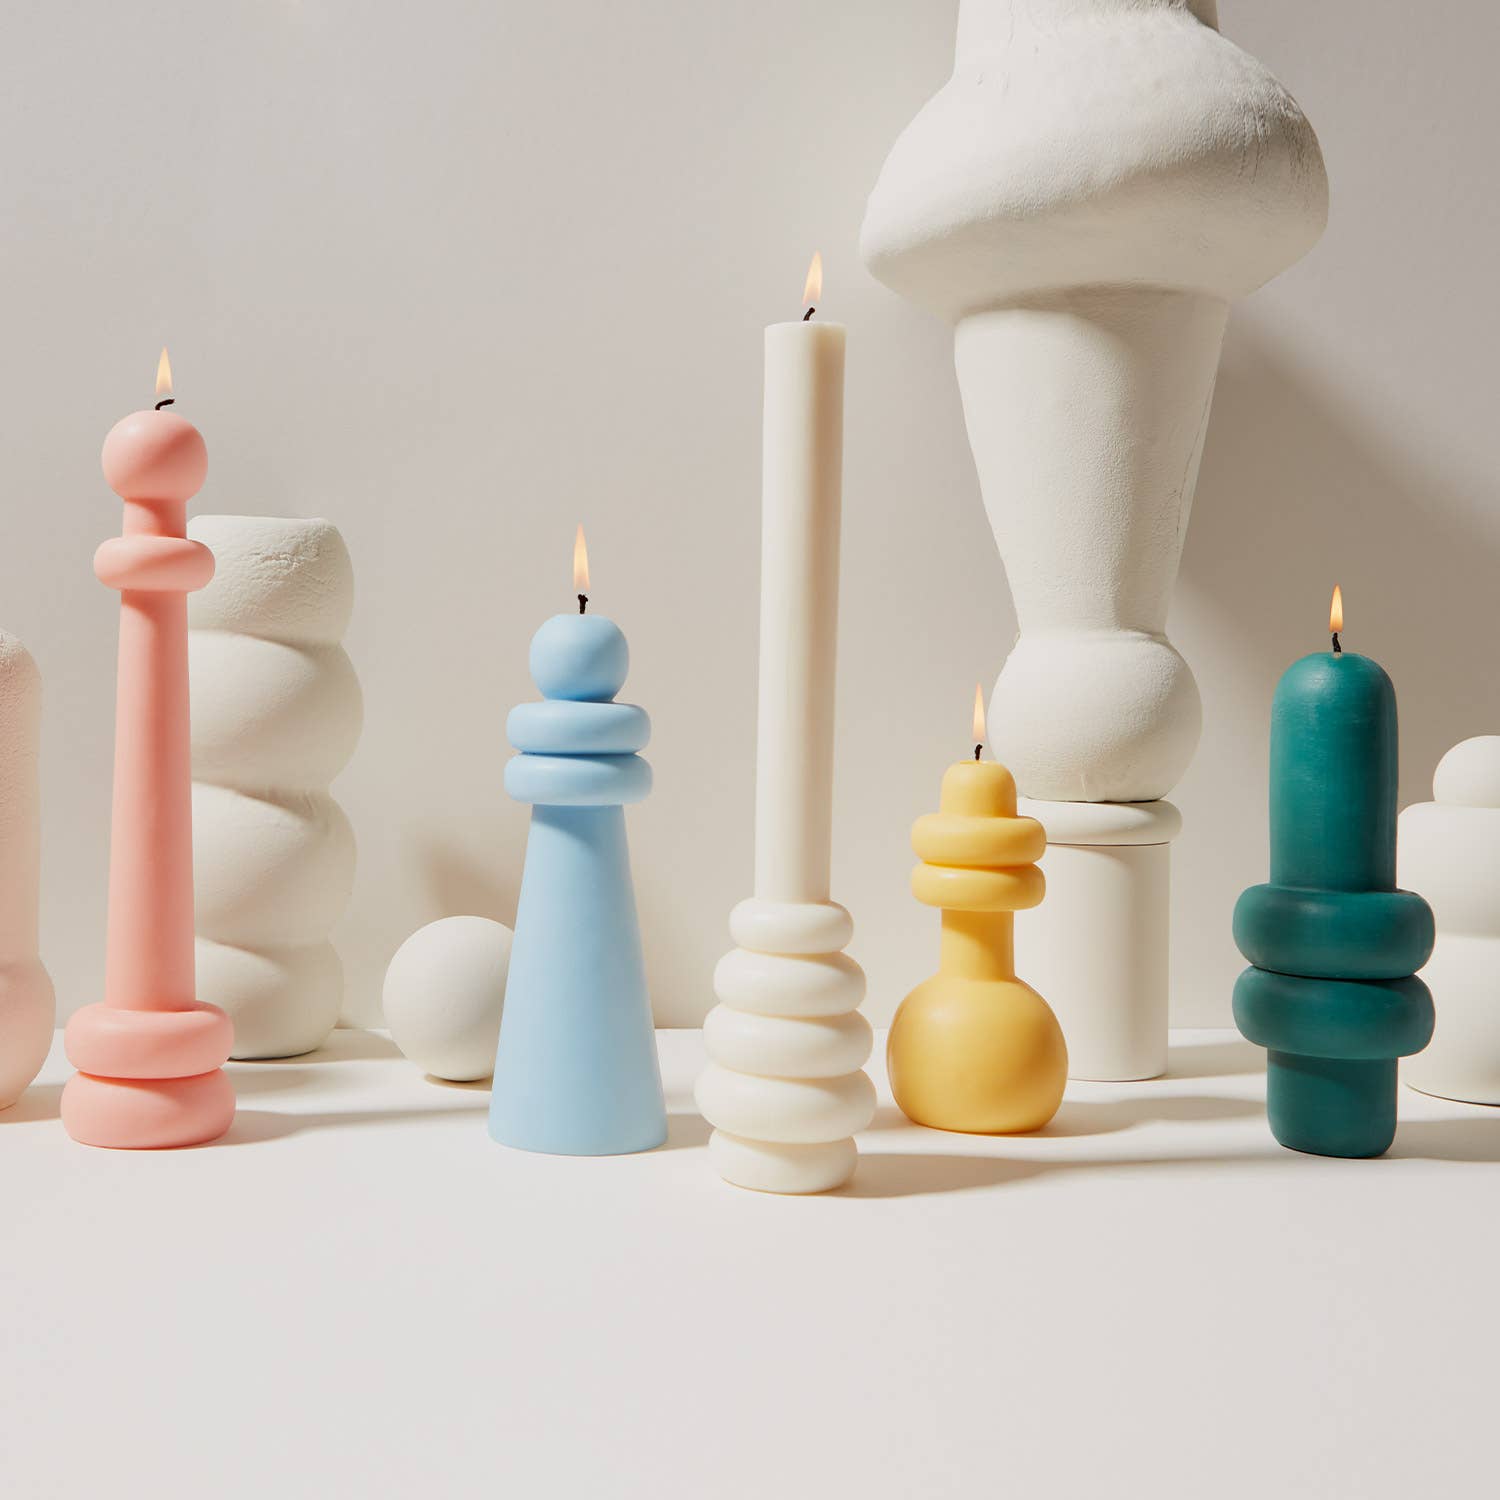 Spindle Candle Con - White